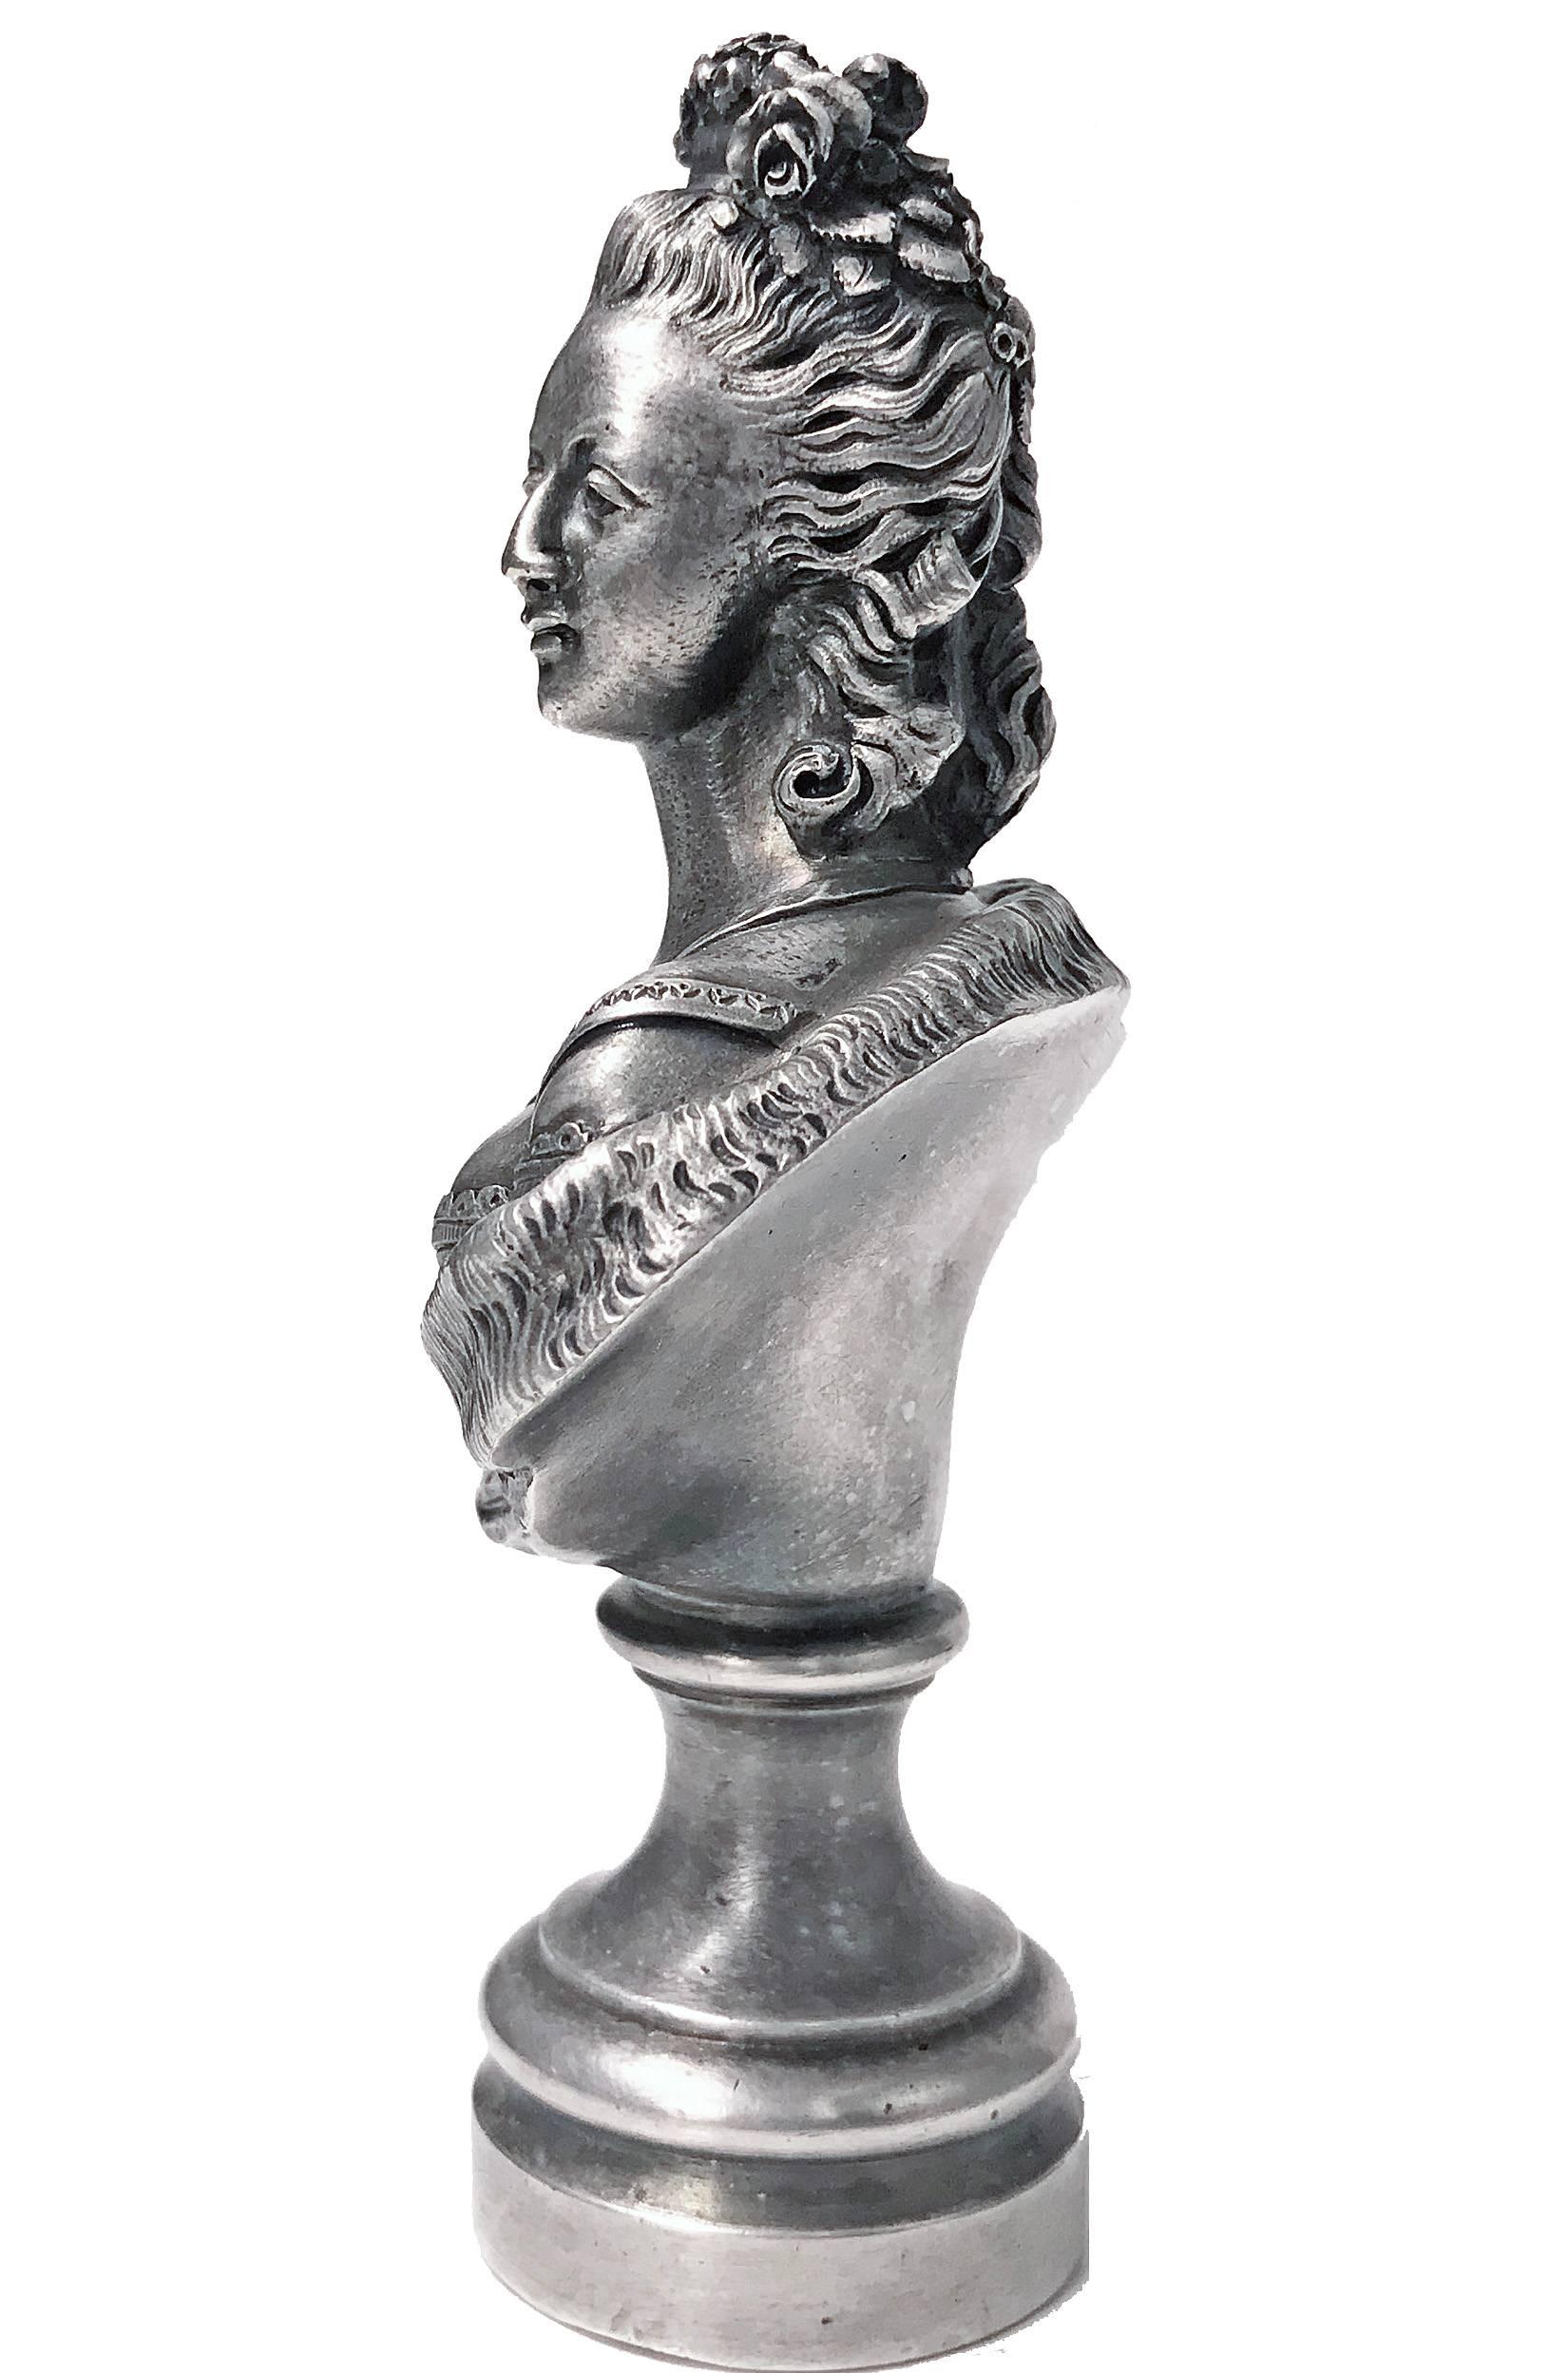 Rare late 19th century heavy silver on bronze desk seal, probably French, circa 1880. The seal very intricately depicting a bust of female profile in Marie Antoinette late 18th century style with upswept hair and draped gown. Unmarked, acid tested